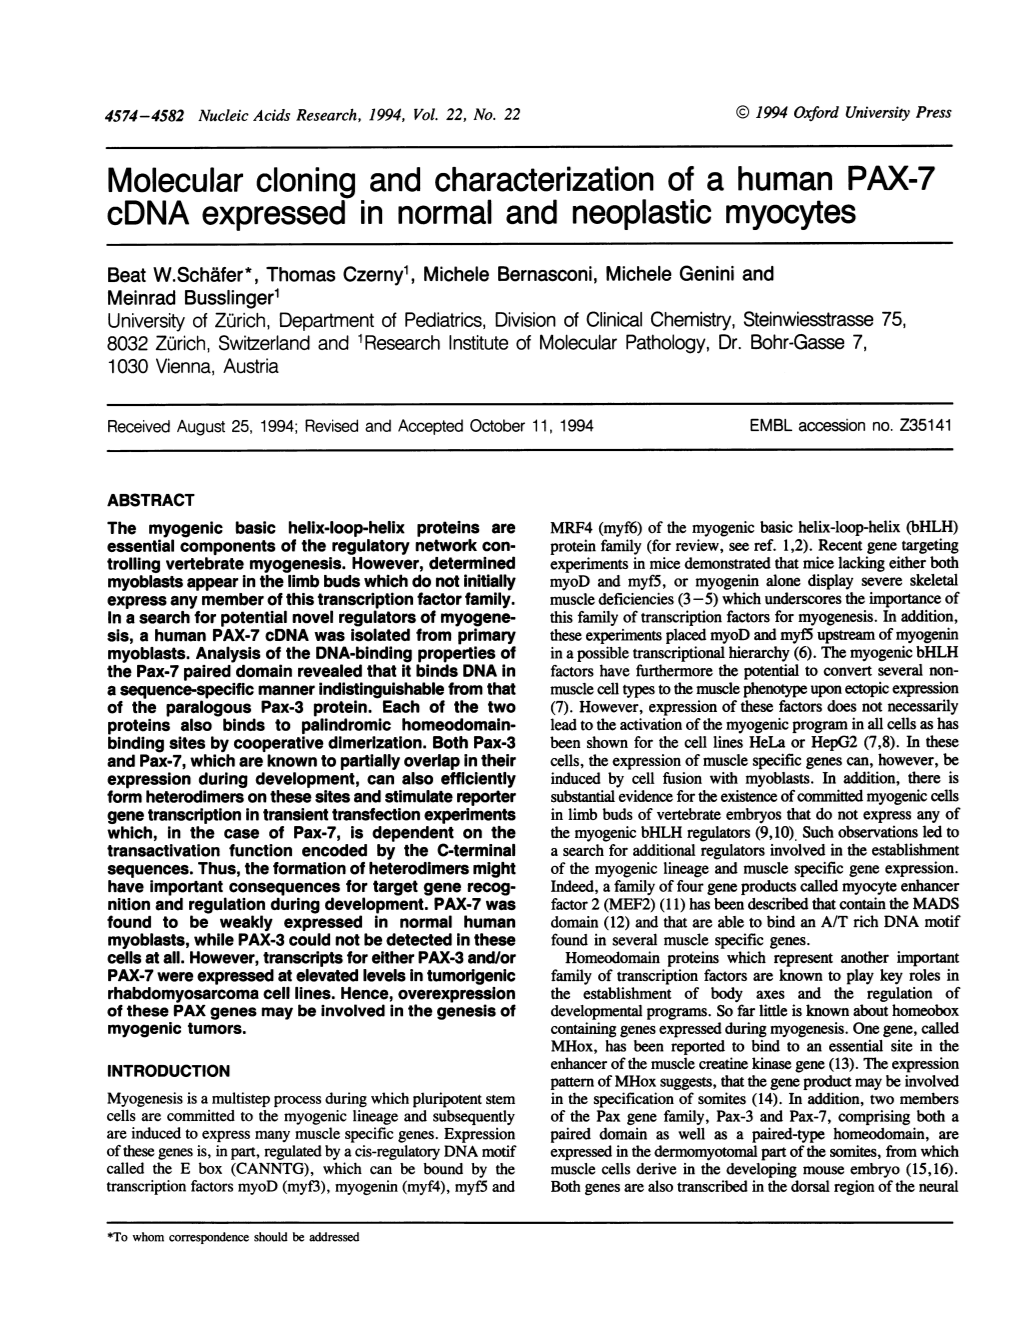 Molecular Cloning and Characterization of a Human PAX-7 Cdna Expressed in Normal and Neoplastic Myocytes